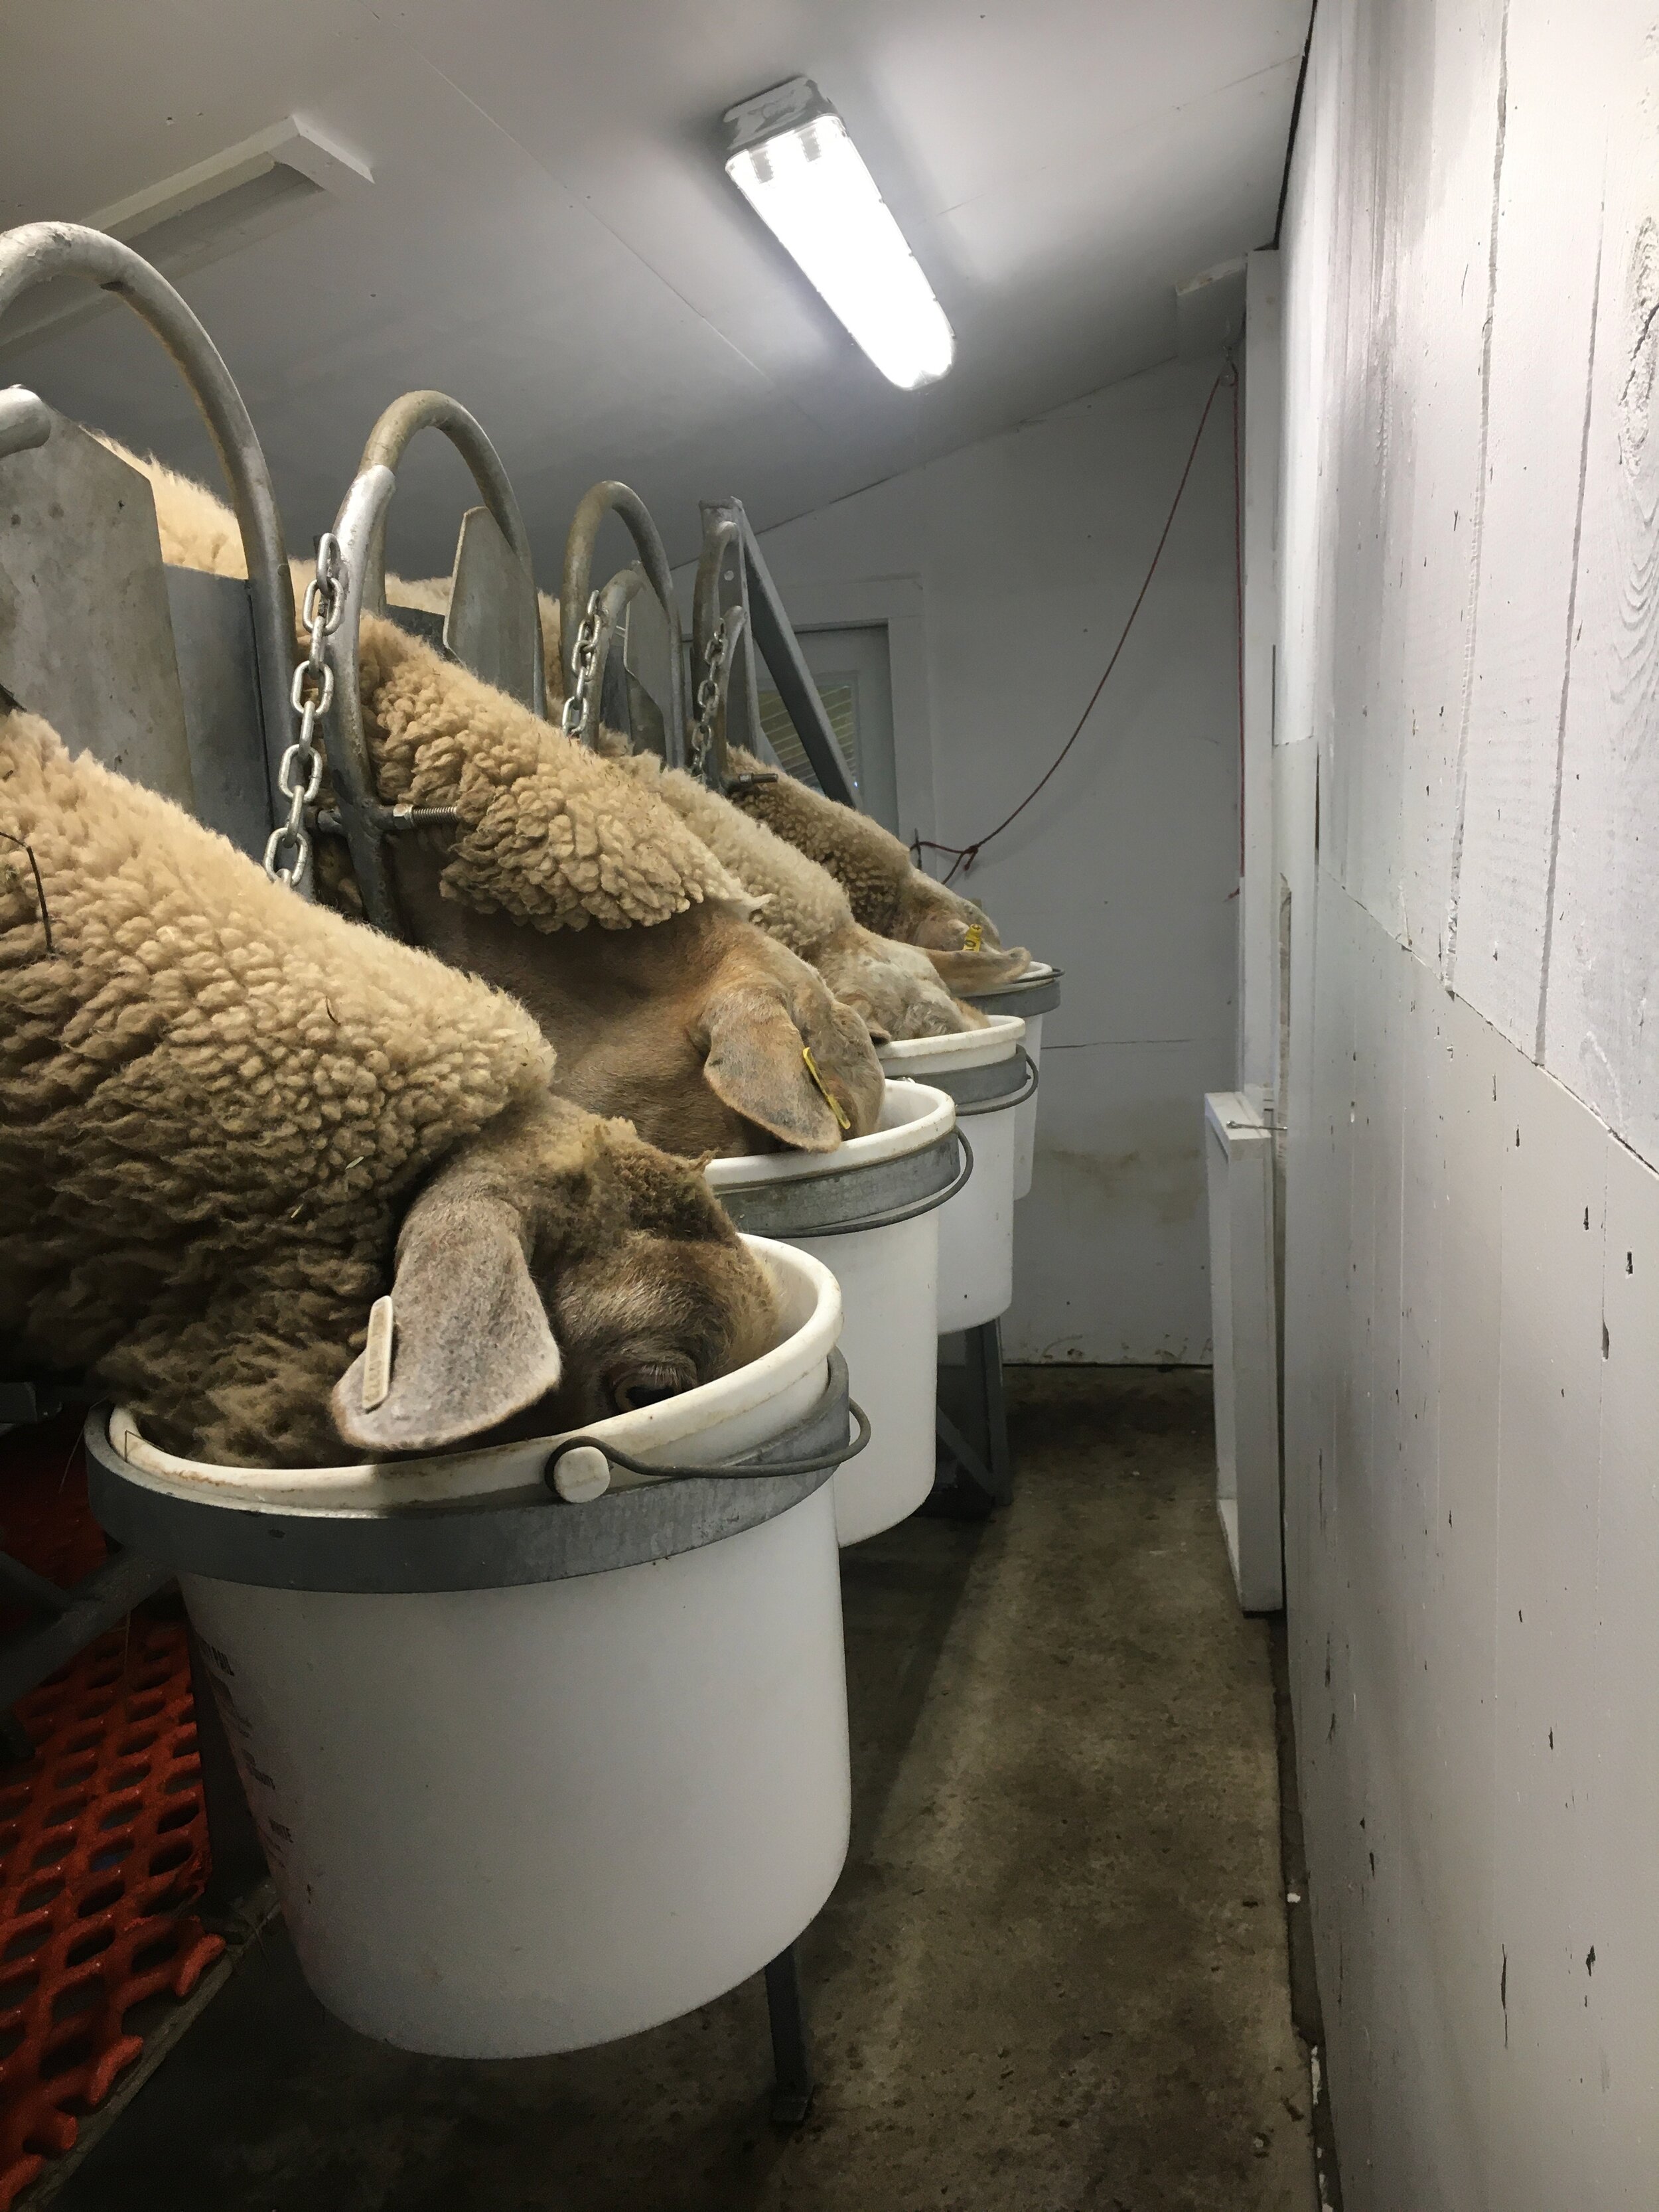 Sheep on milking stand